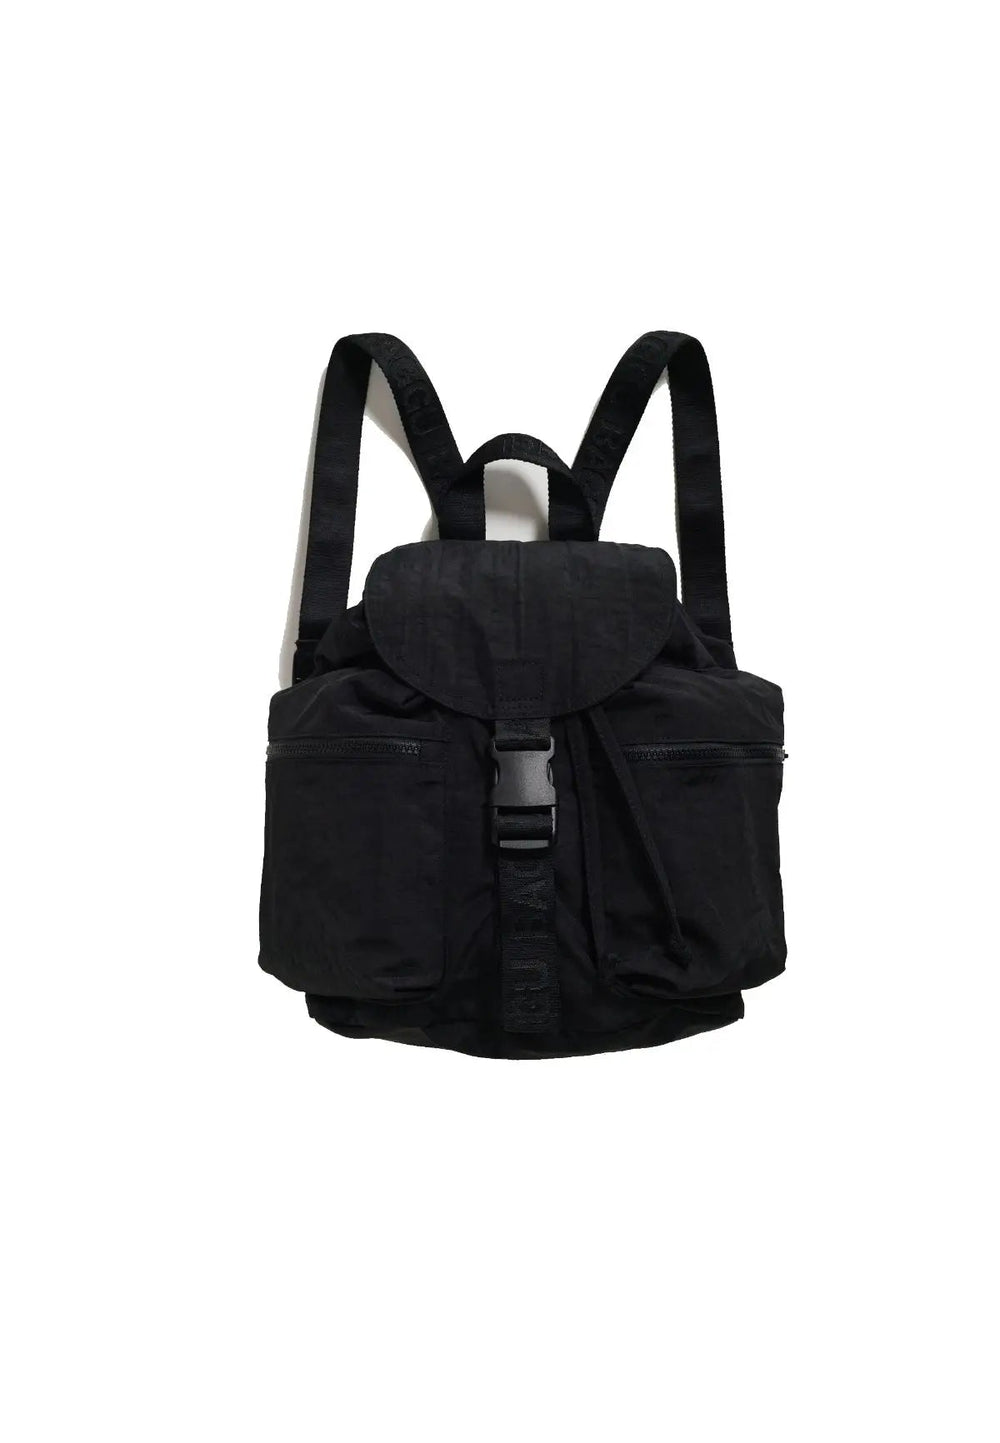 SMALL SPORT BACKPACK BLACK - Moeon